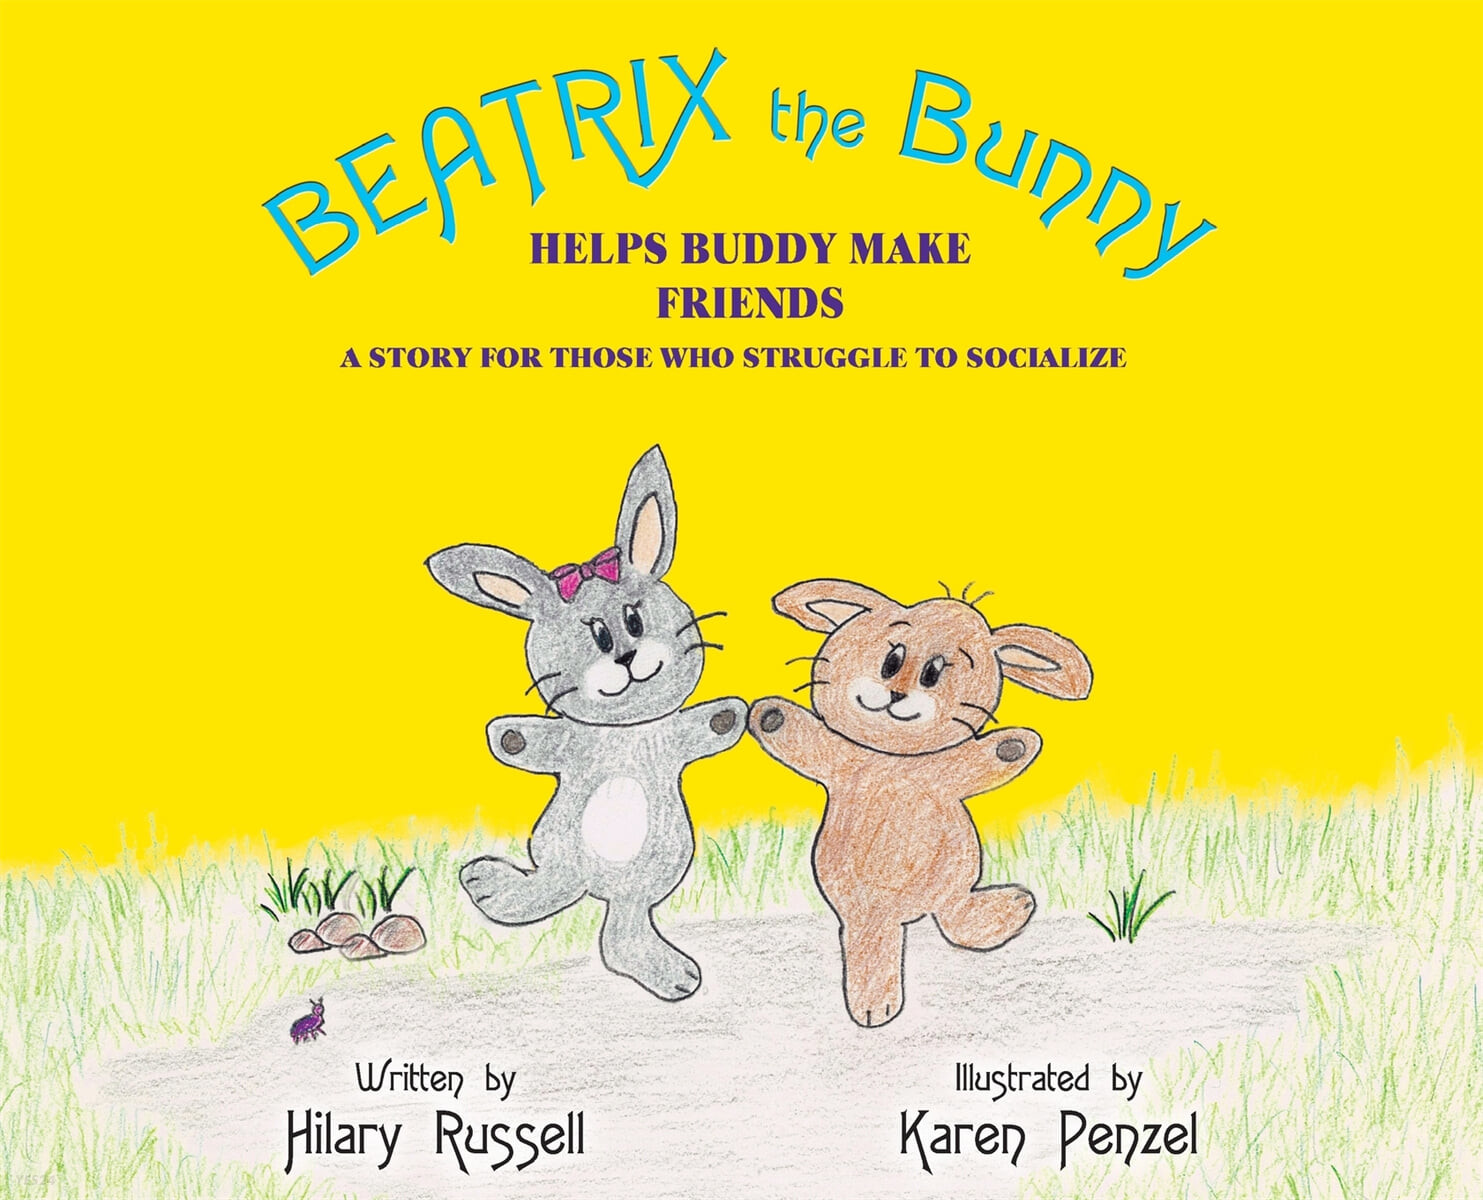 Beatrix the bunny helps buddy make friends : a story for those who struggle to socialize 